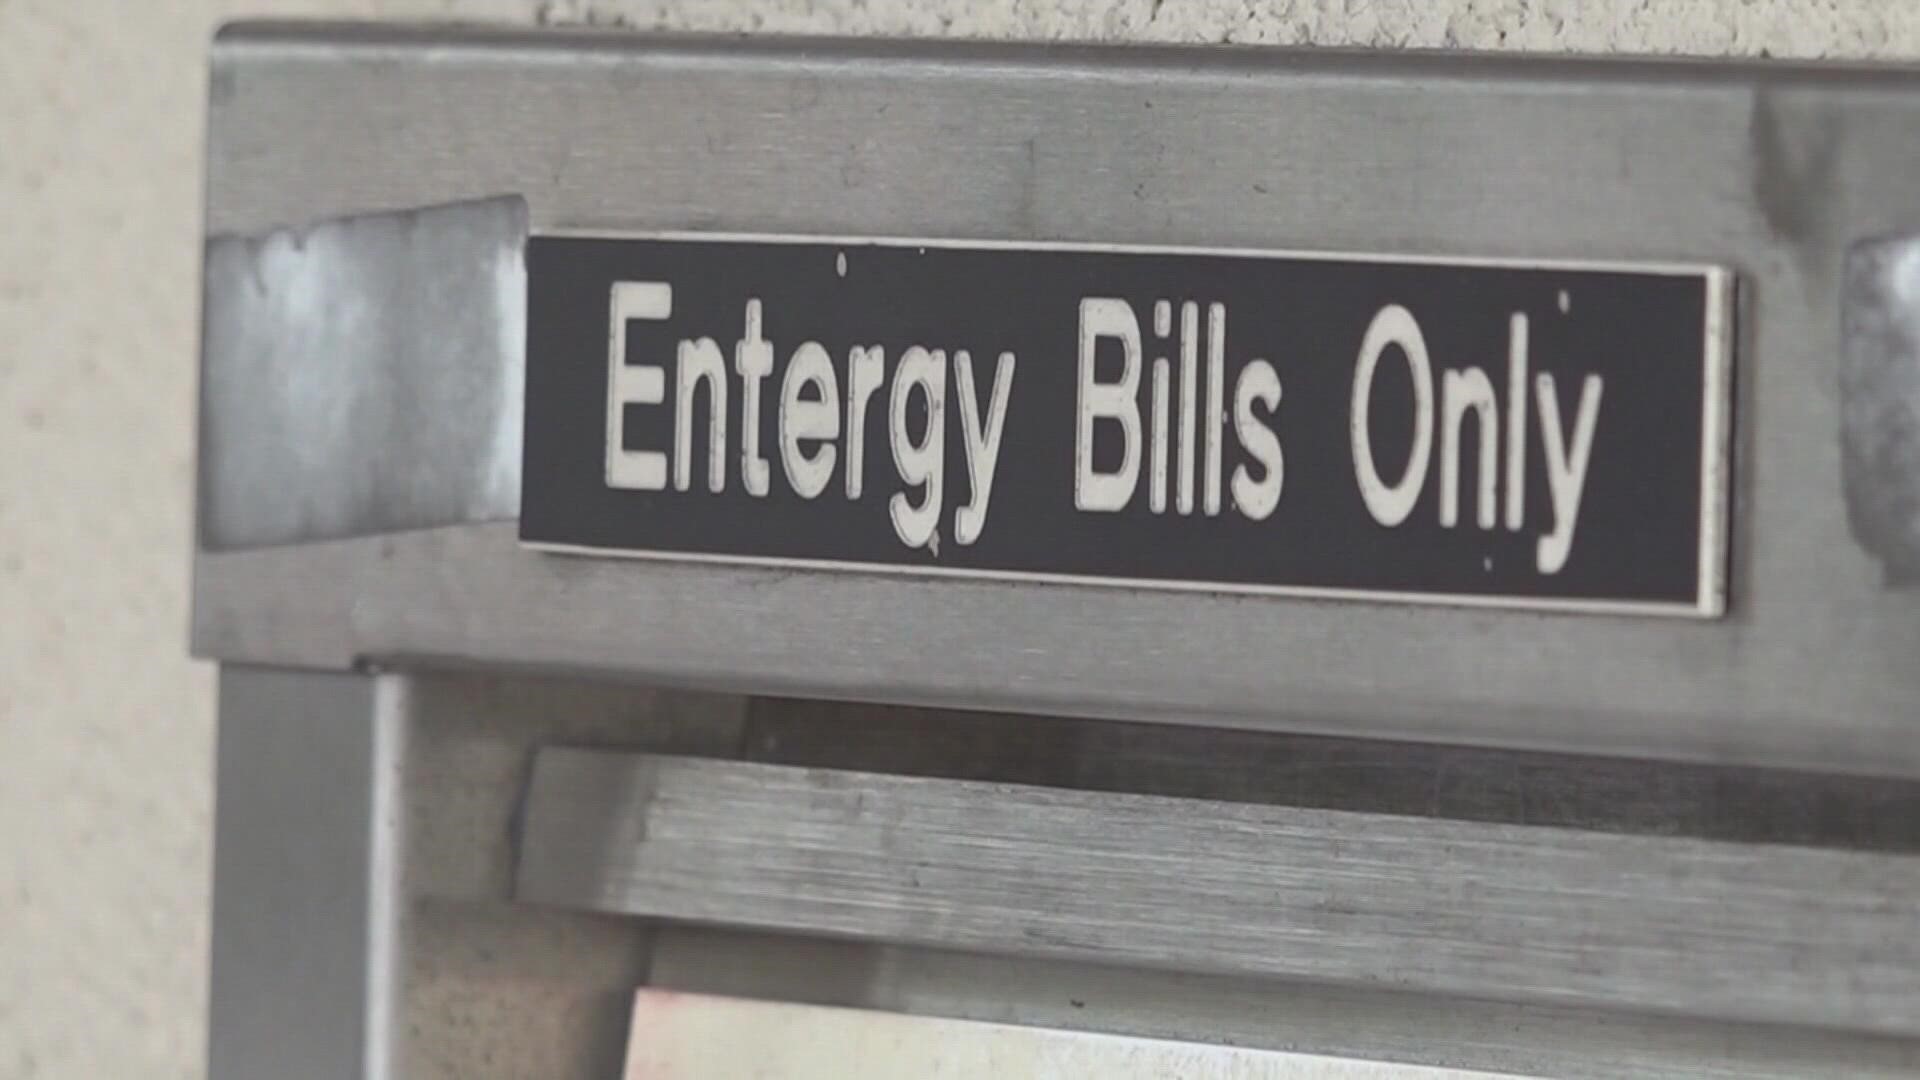 Entergy agreed with the Orleans City Council's decision to pause energy shutoffs as costs skyrocket